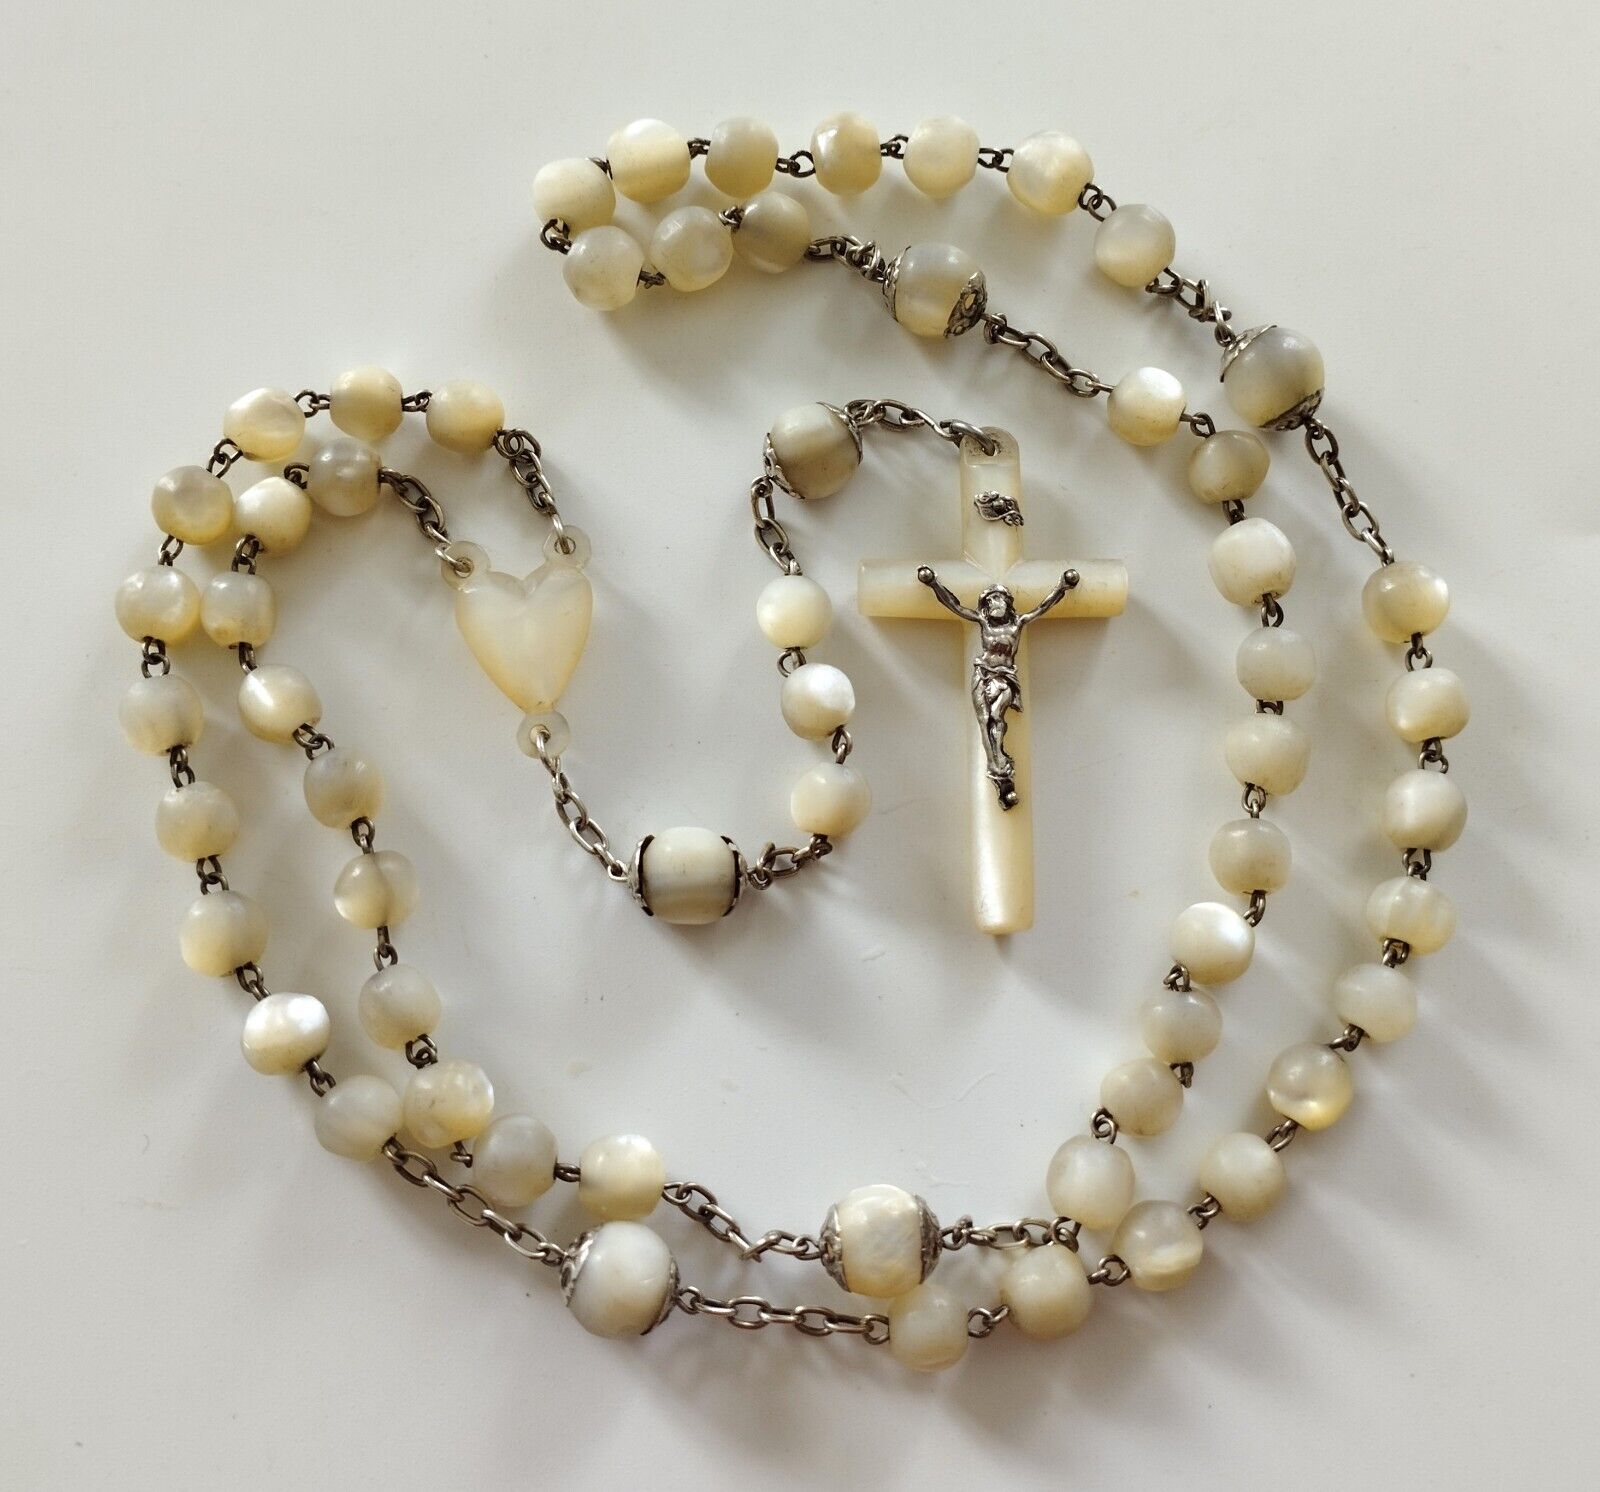 Mama-Estelle Antique Long Rosary Silver 59 Large Beads Of Mother-of-Pearl